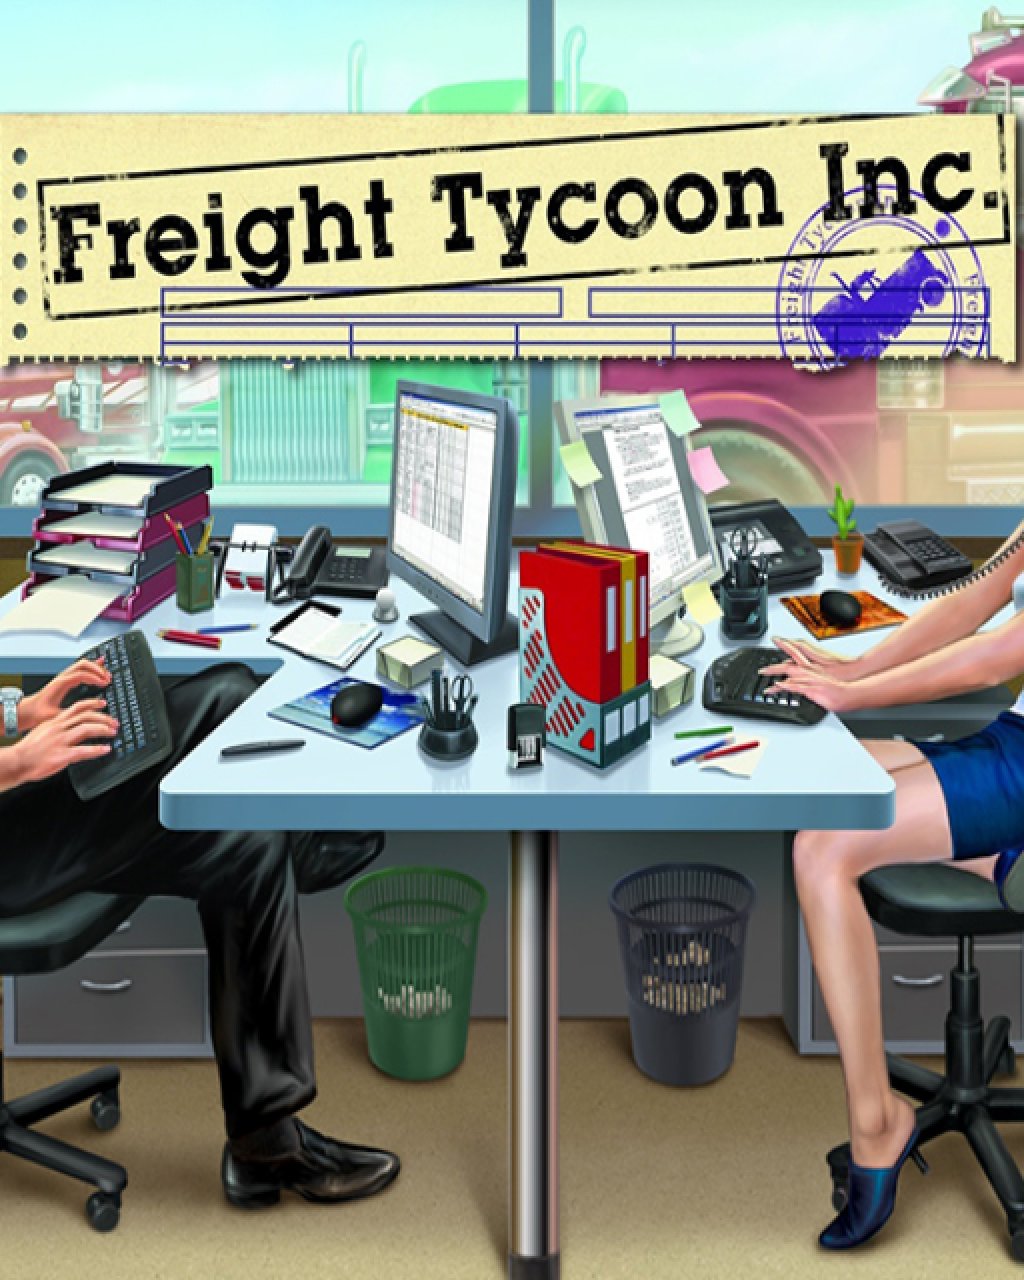 Freight Tycoon Inc